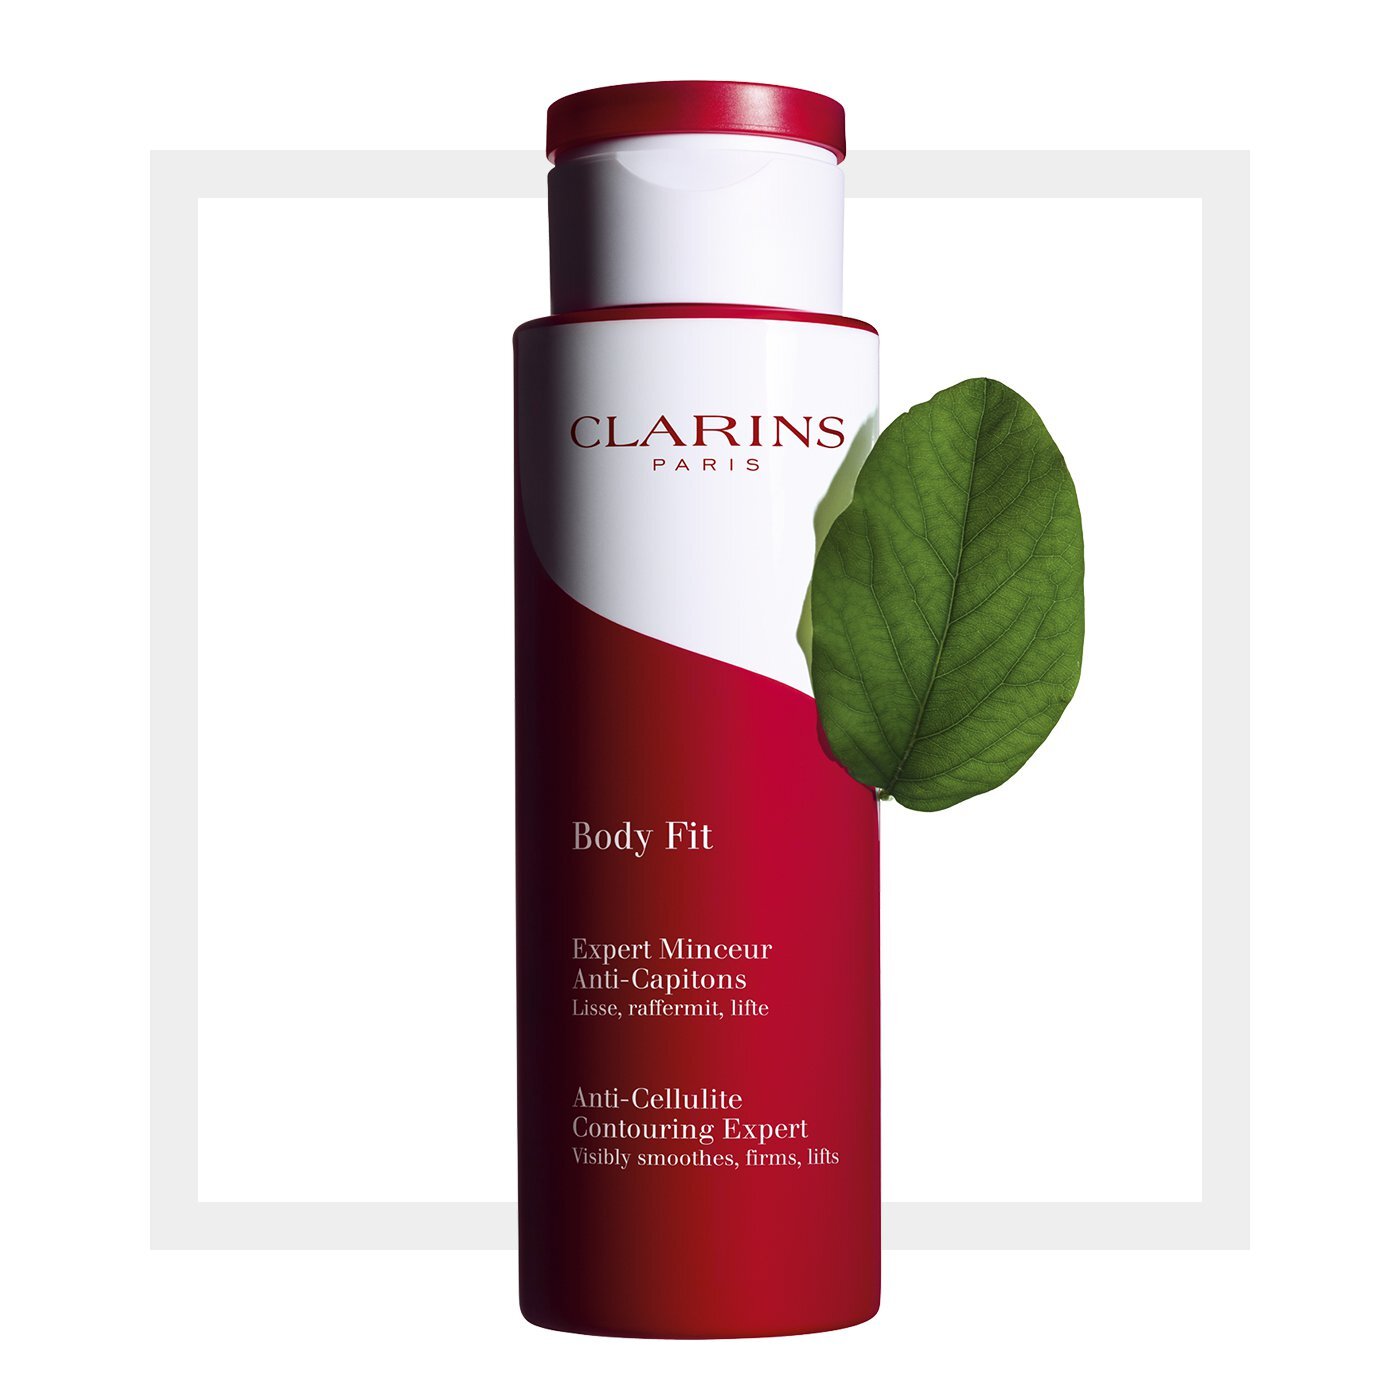 Clarins Body Fit Expert Minceur Anti Cellulite